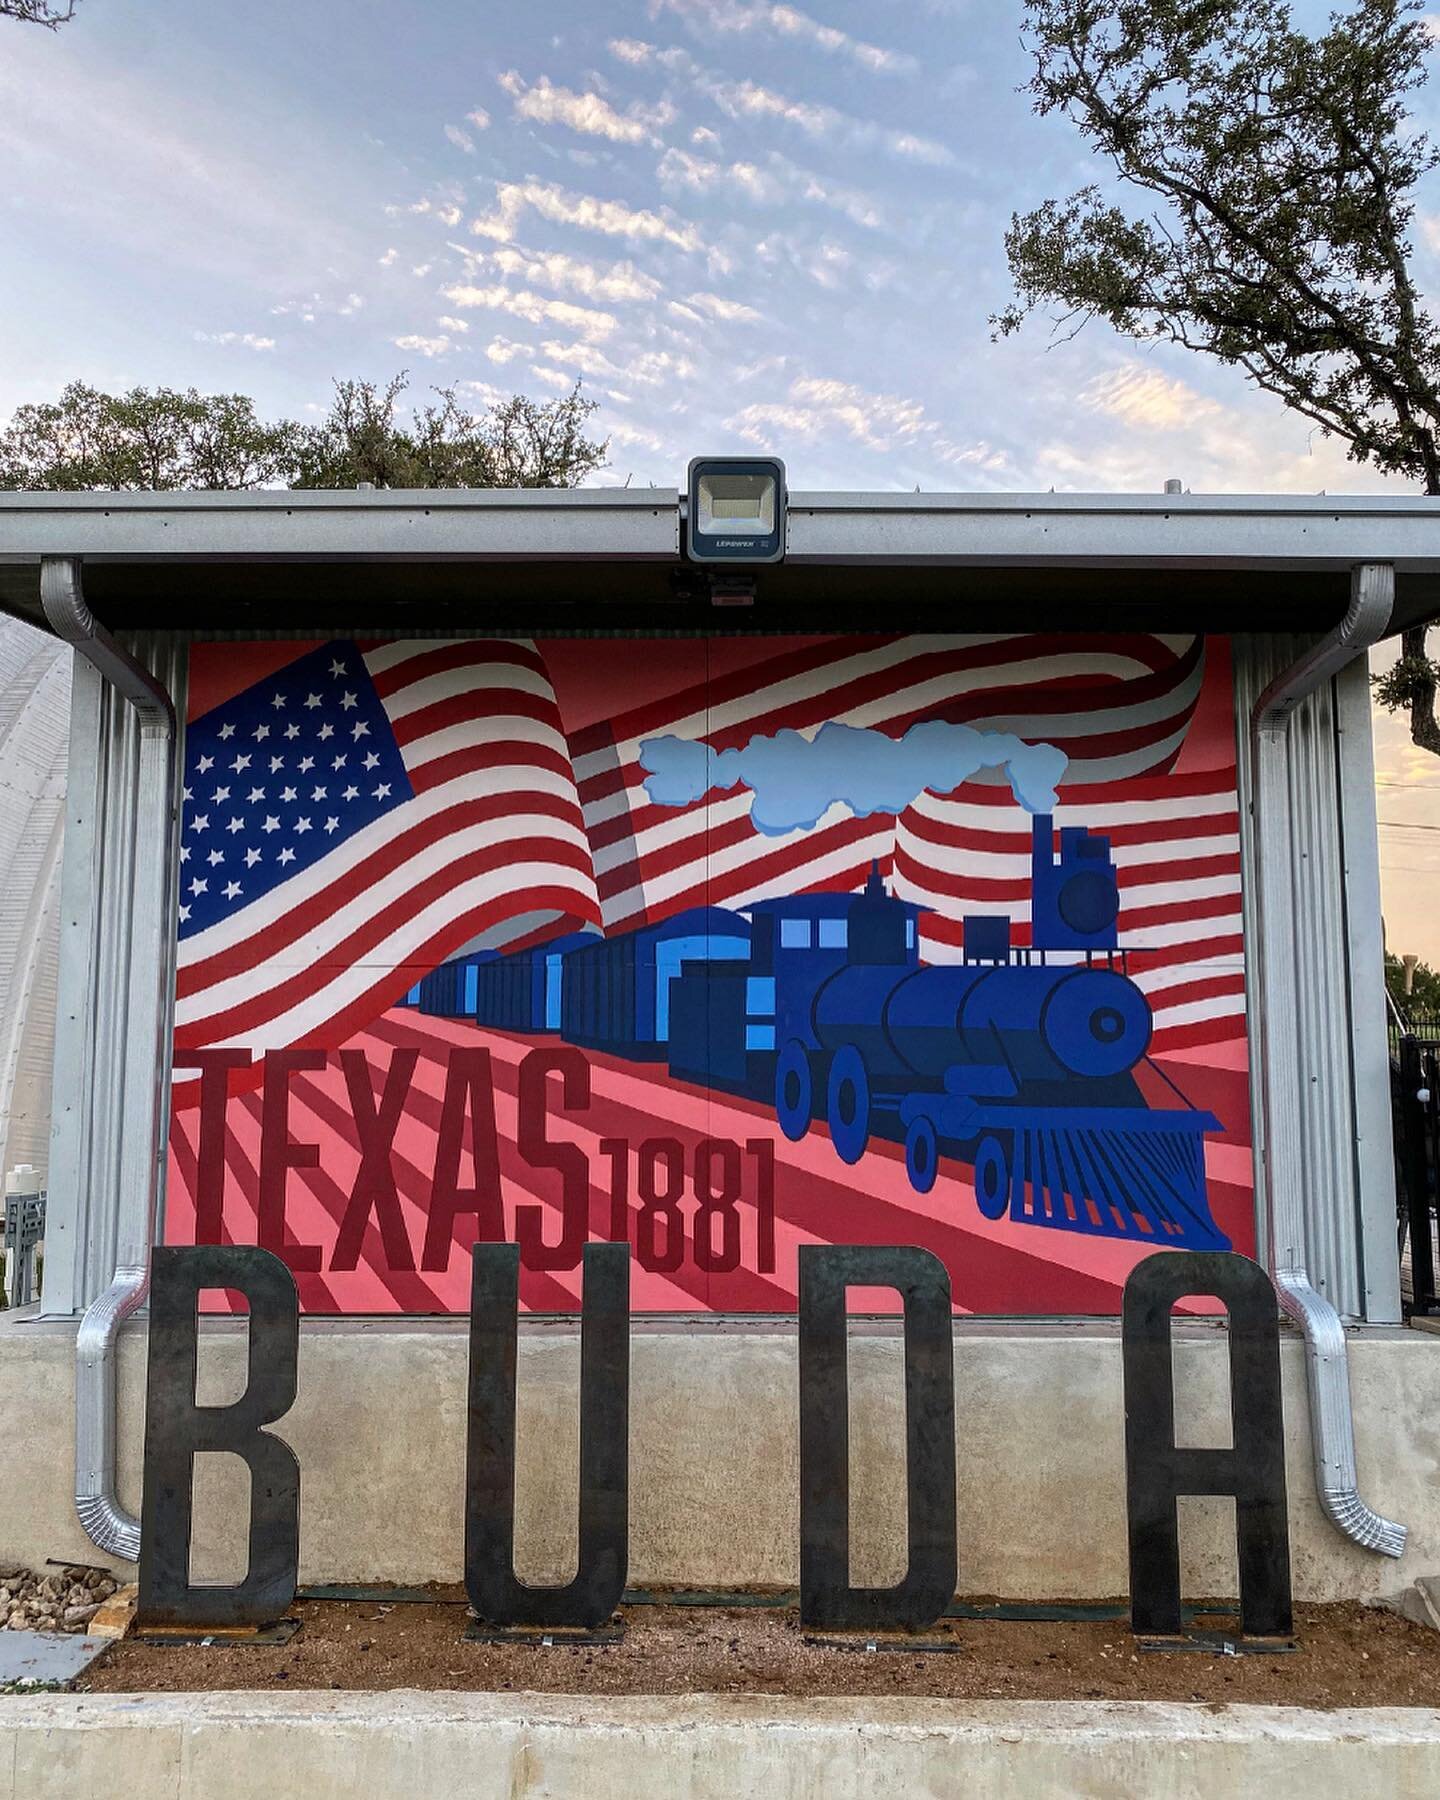 Bustlin' Buda!
.
Brittany and I won the Buda, Texas mural contest! Here's our patriotic, tech-mural-sculpture for @ww2minigolfandmuseum inspired by downtown Buda. With augmented reality features powered by @unstationeryco, mini-golfers can scan a QR 